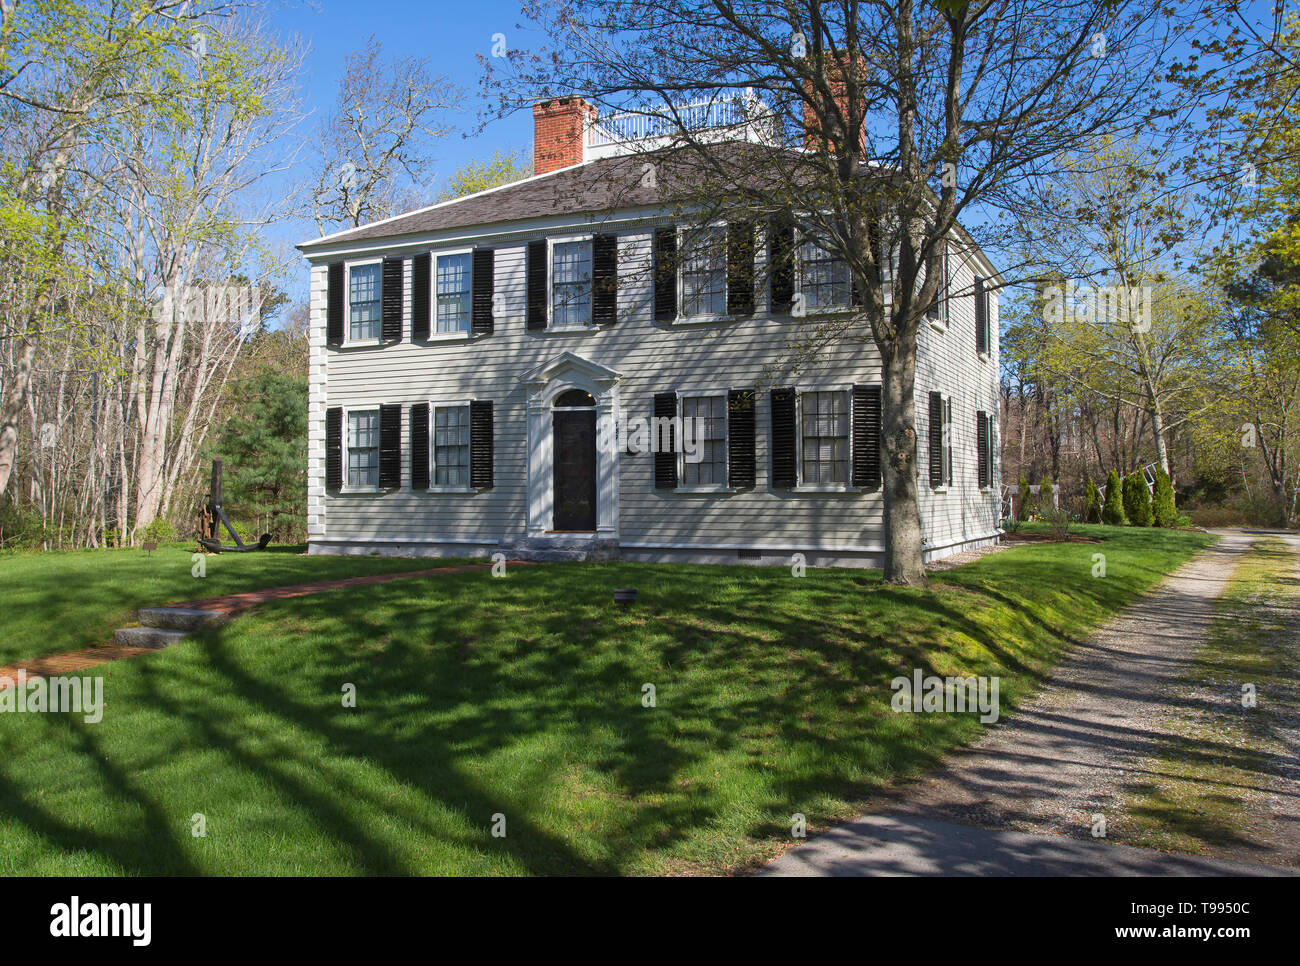 The Elijah Cobb house in Brewster, Massachusetts, USA - a Cape Cod sea captain's home built in 1799 and preseved by the Brewster Historical Society. Stock Photo